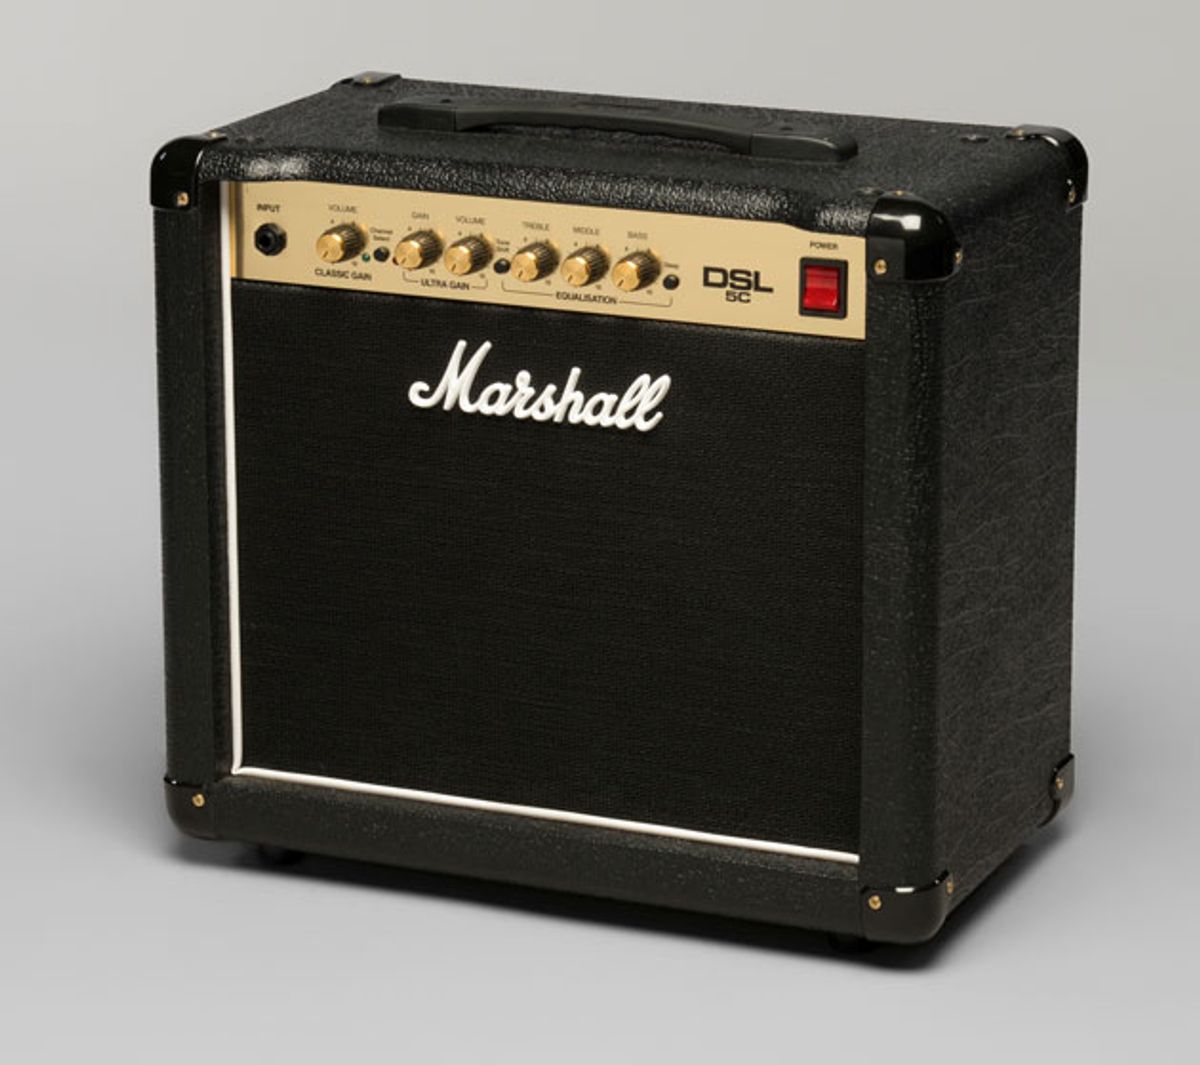 Marshall Amplification Introduces the DSL5C